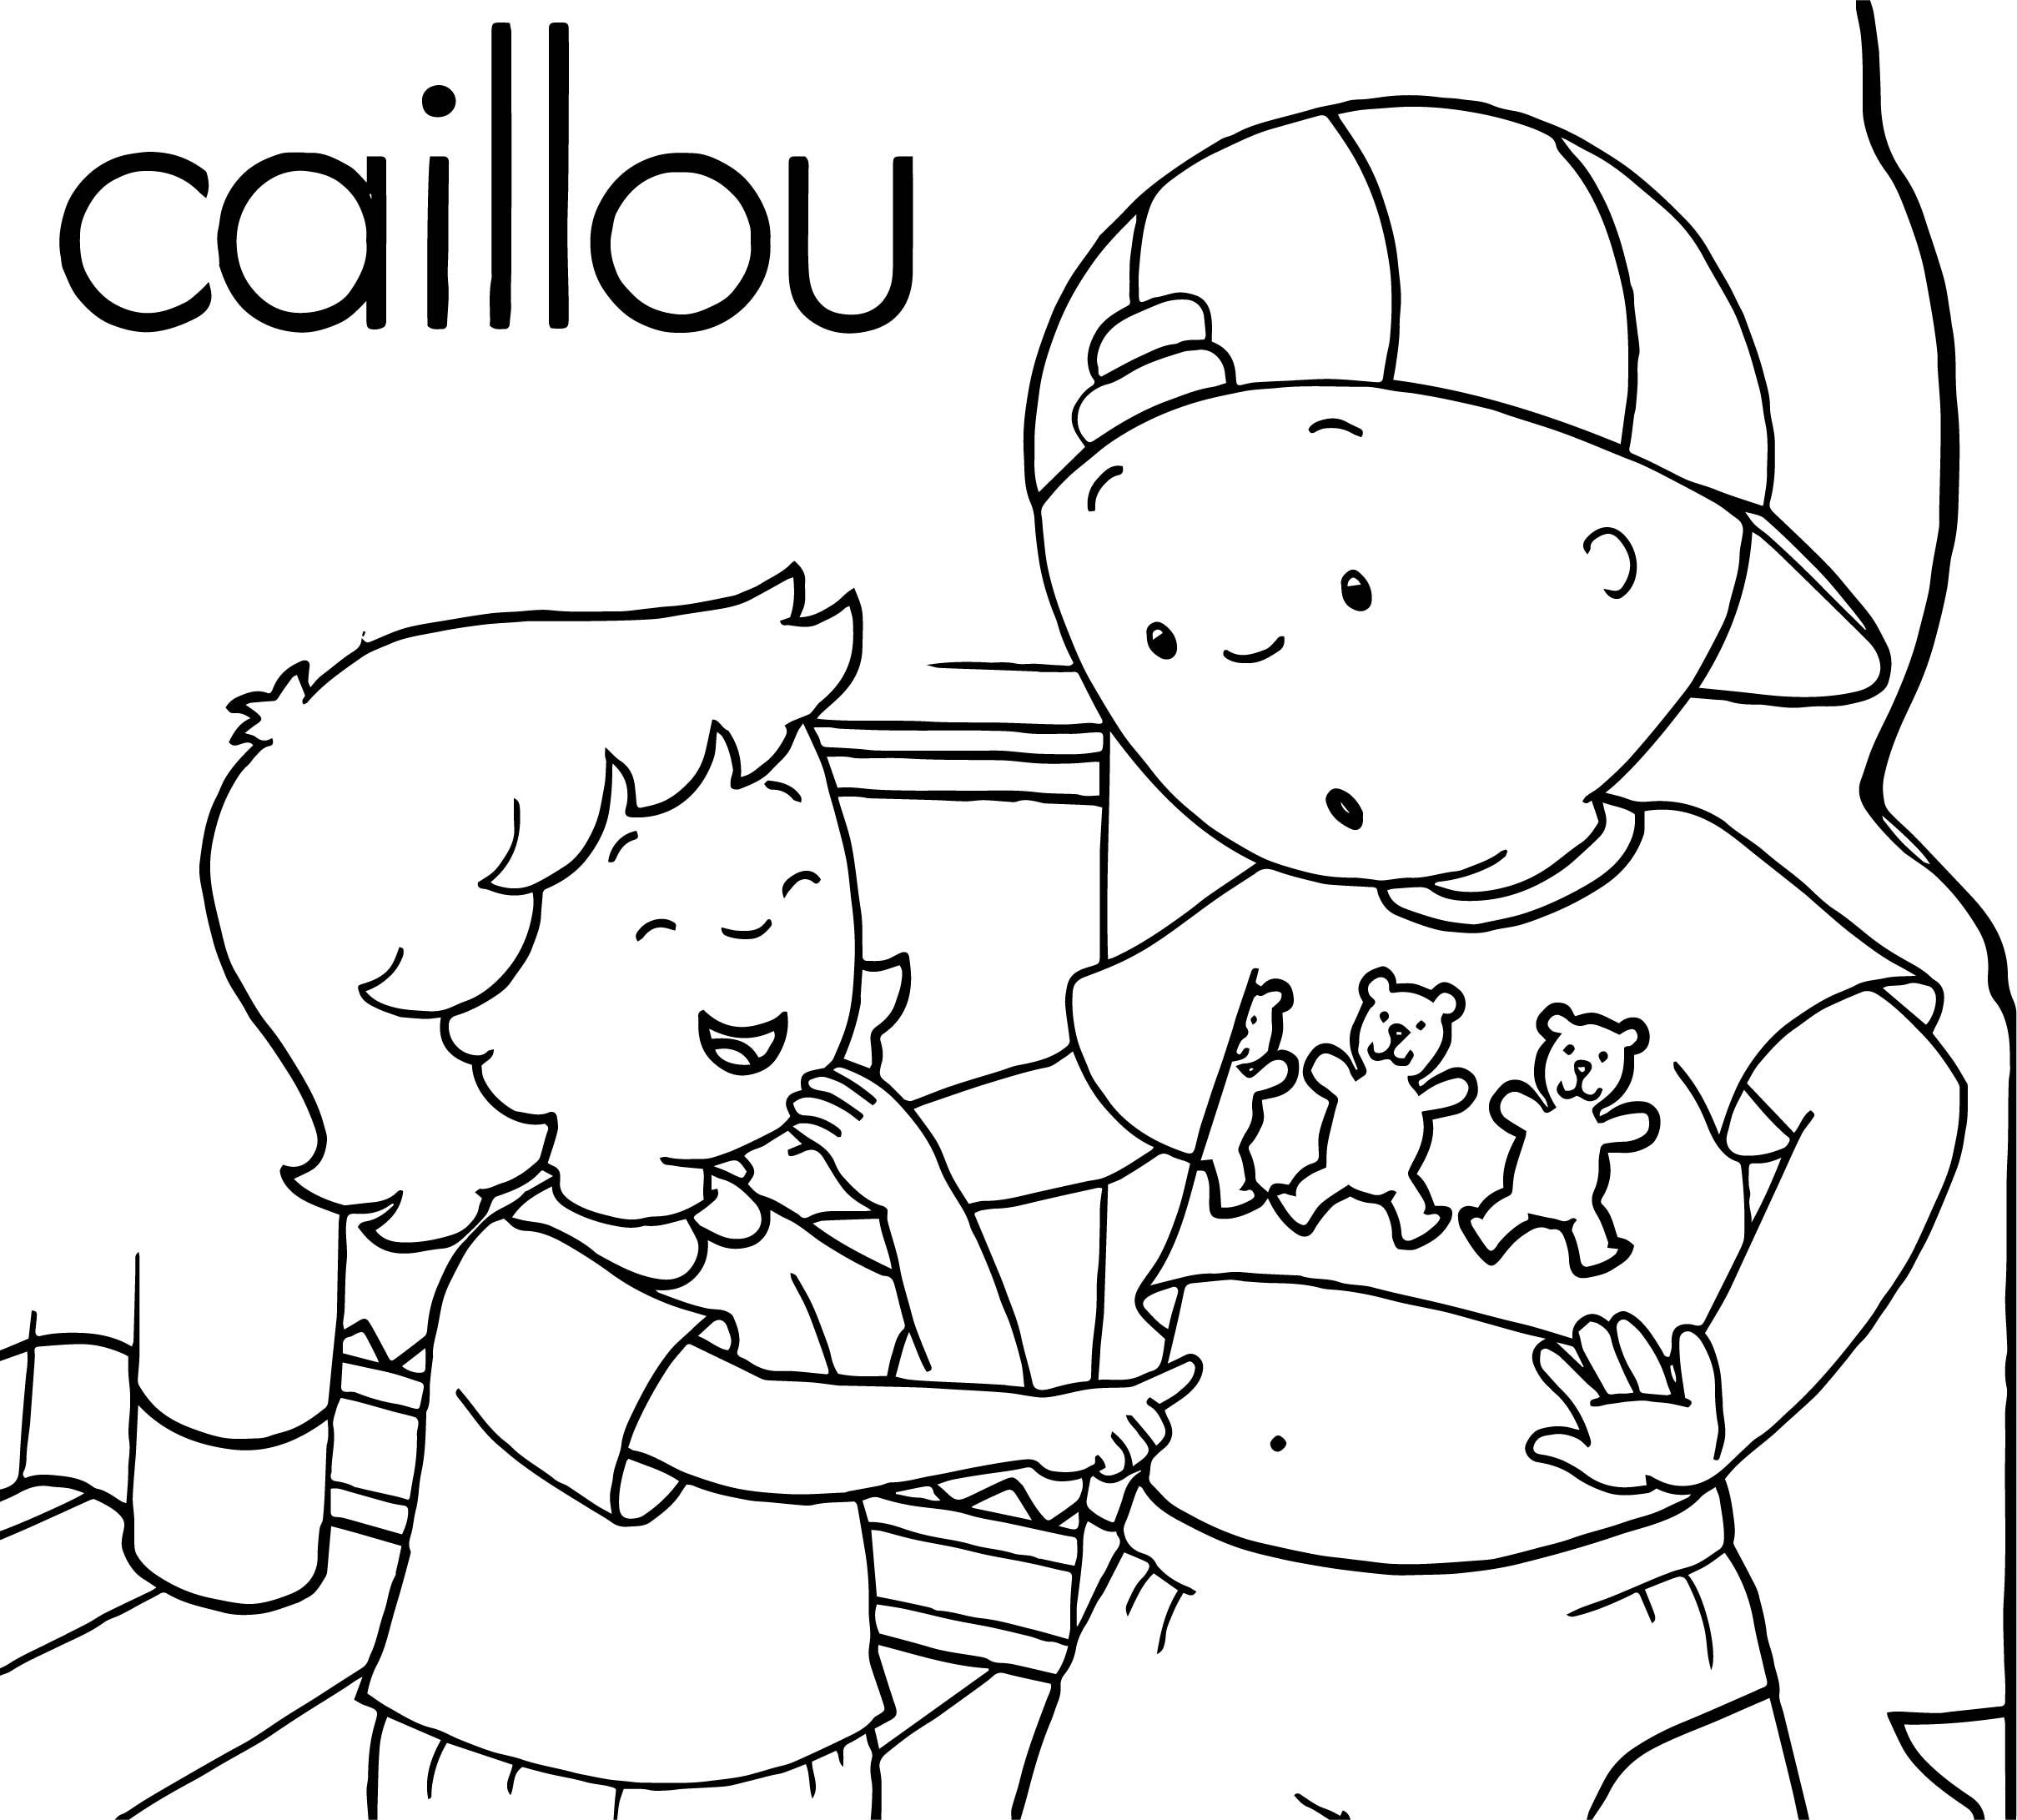 caillou and rosie coloring pages